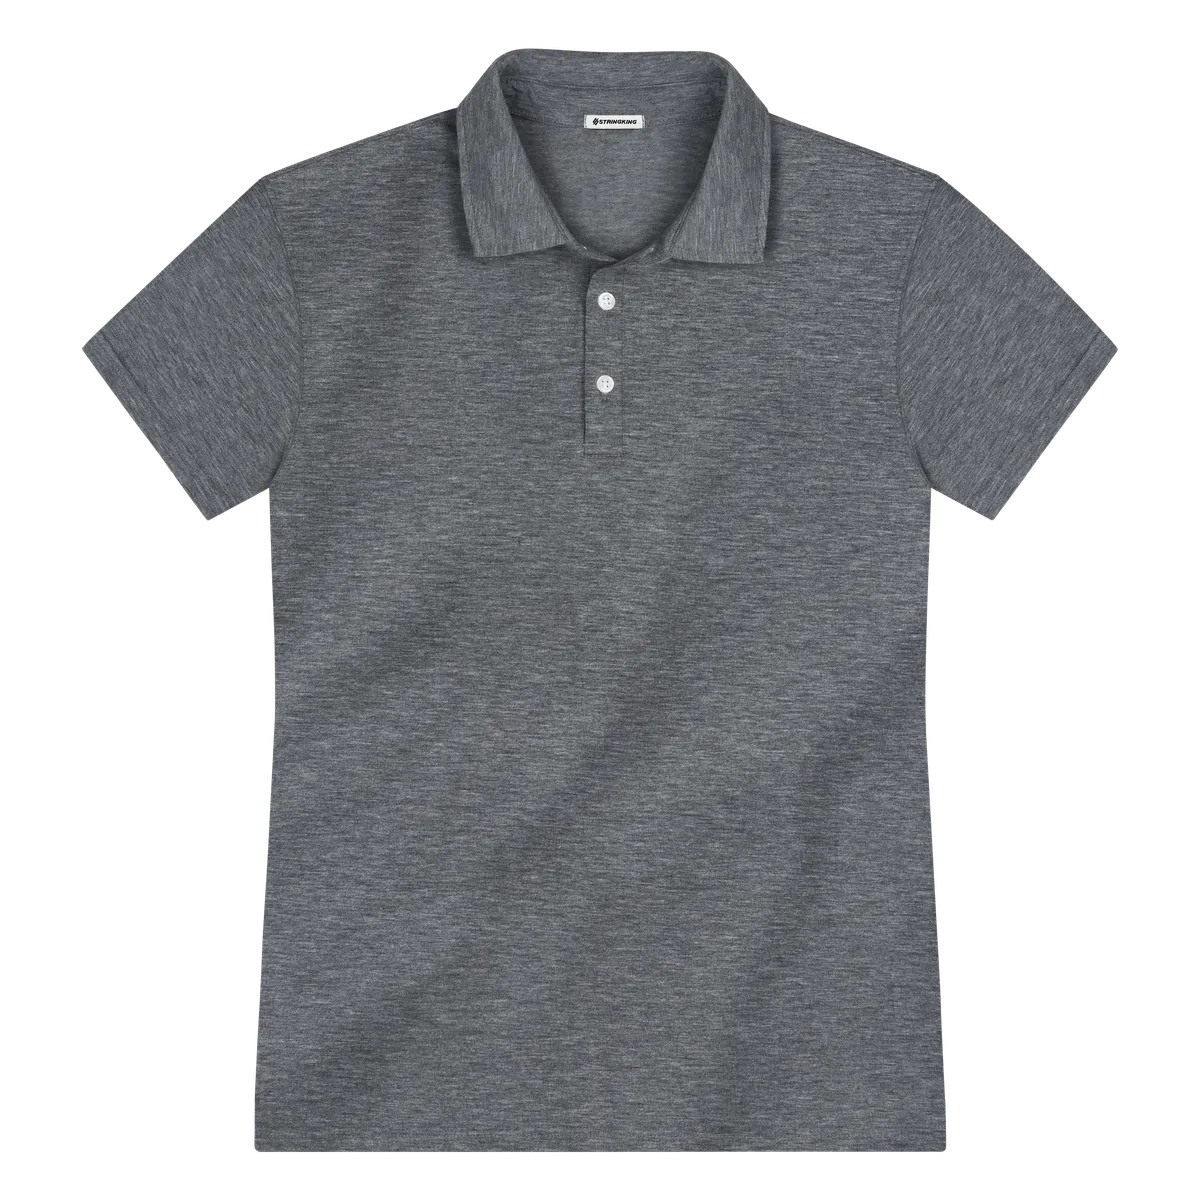 StringKing Men's FlexStyle Short Sleeve Polo - Sharp Fit, Heather Gray, Front